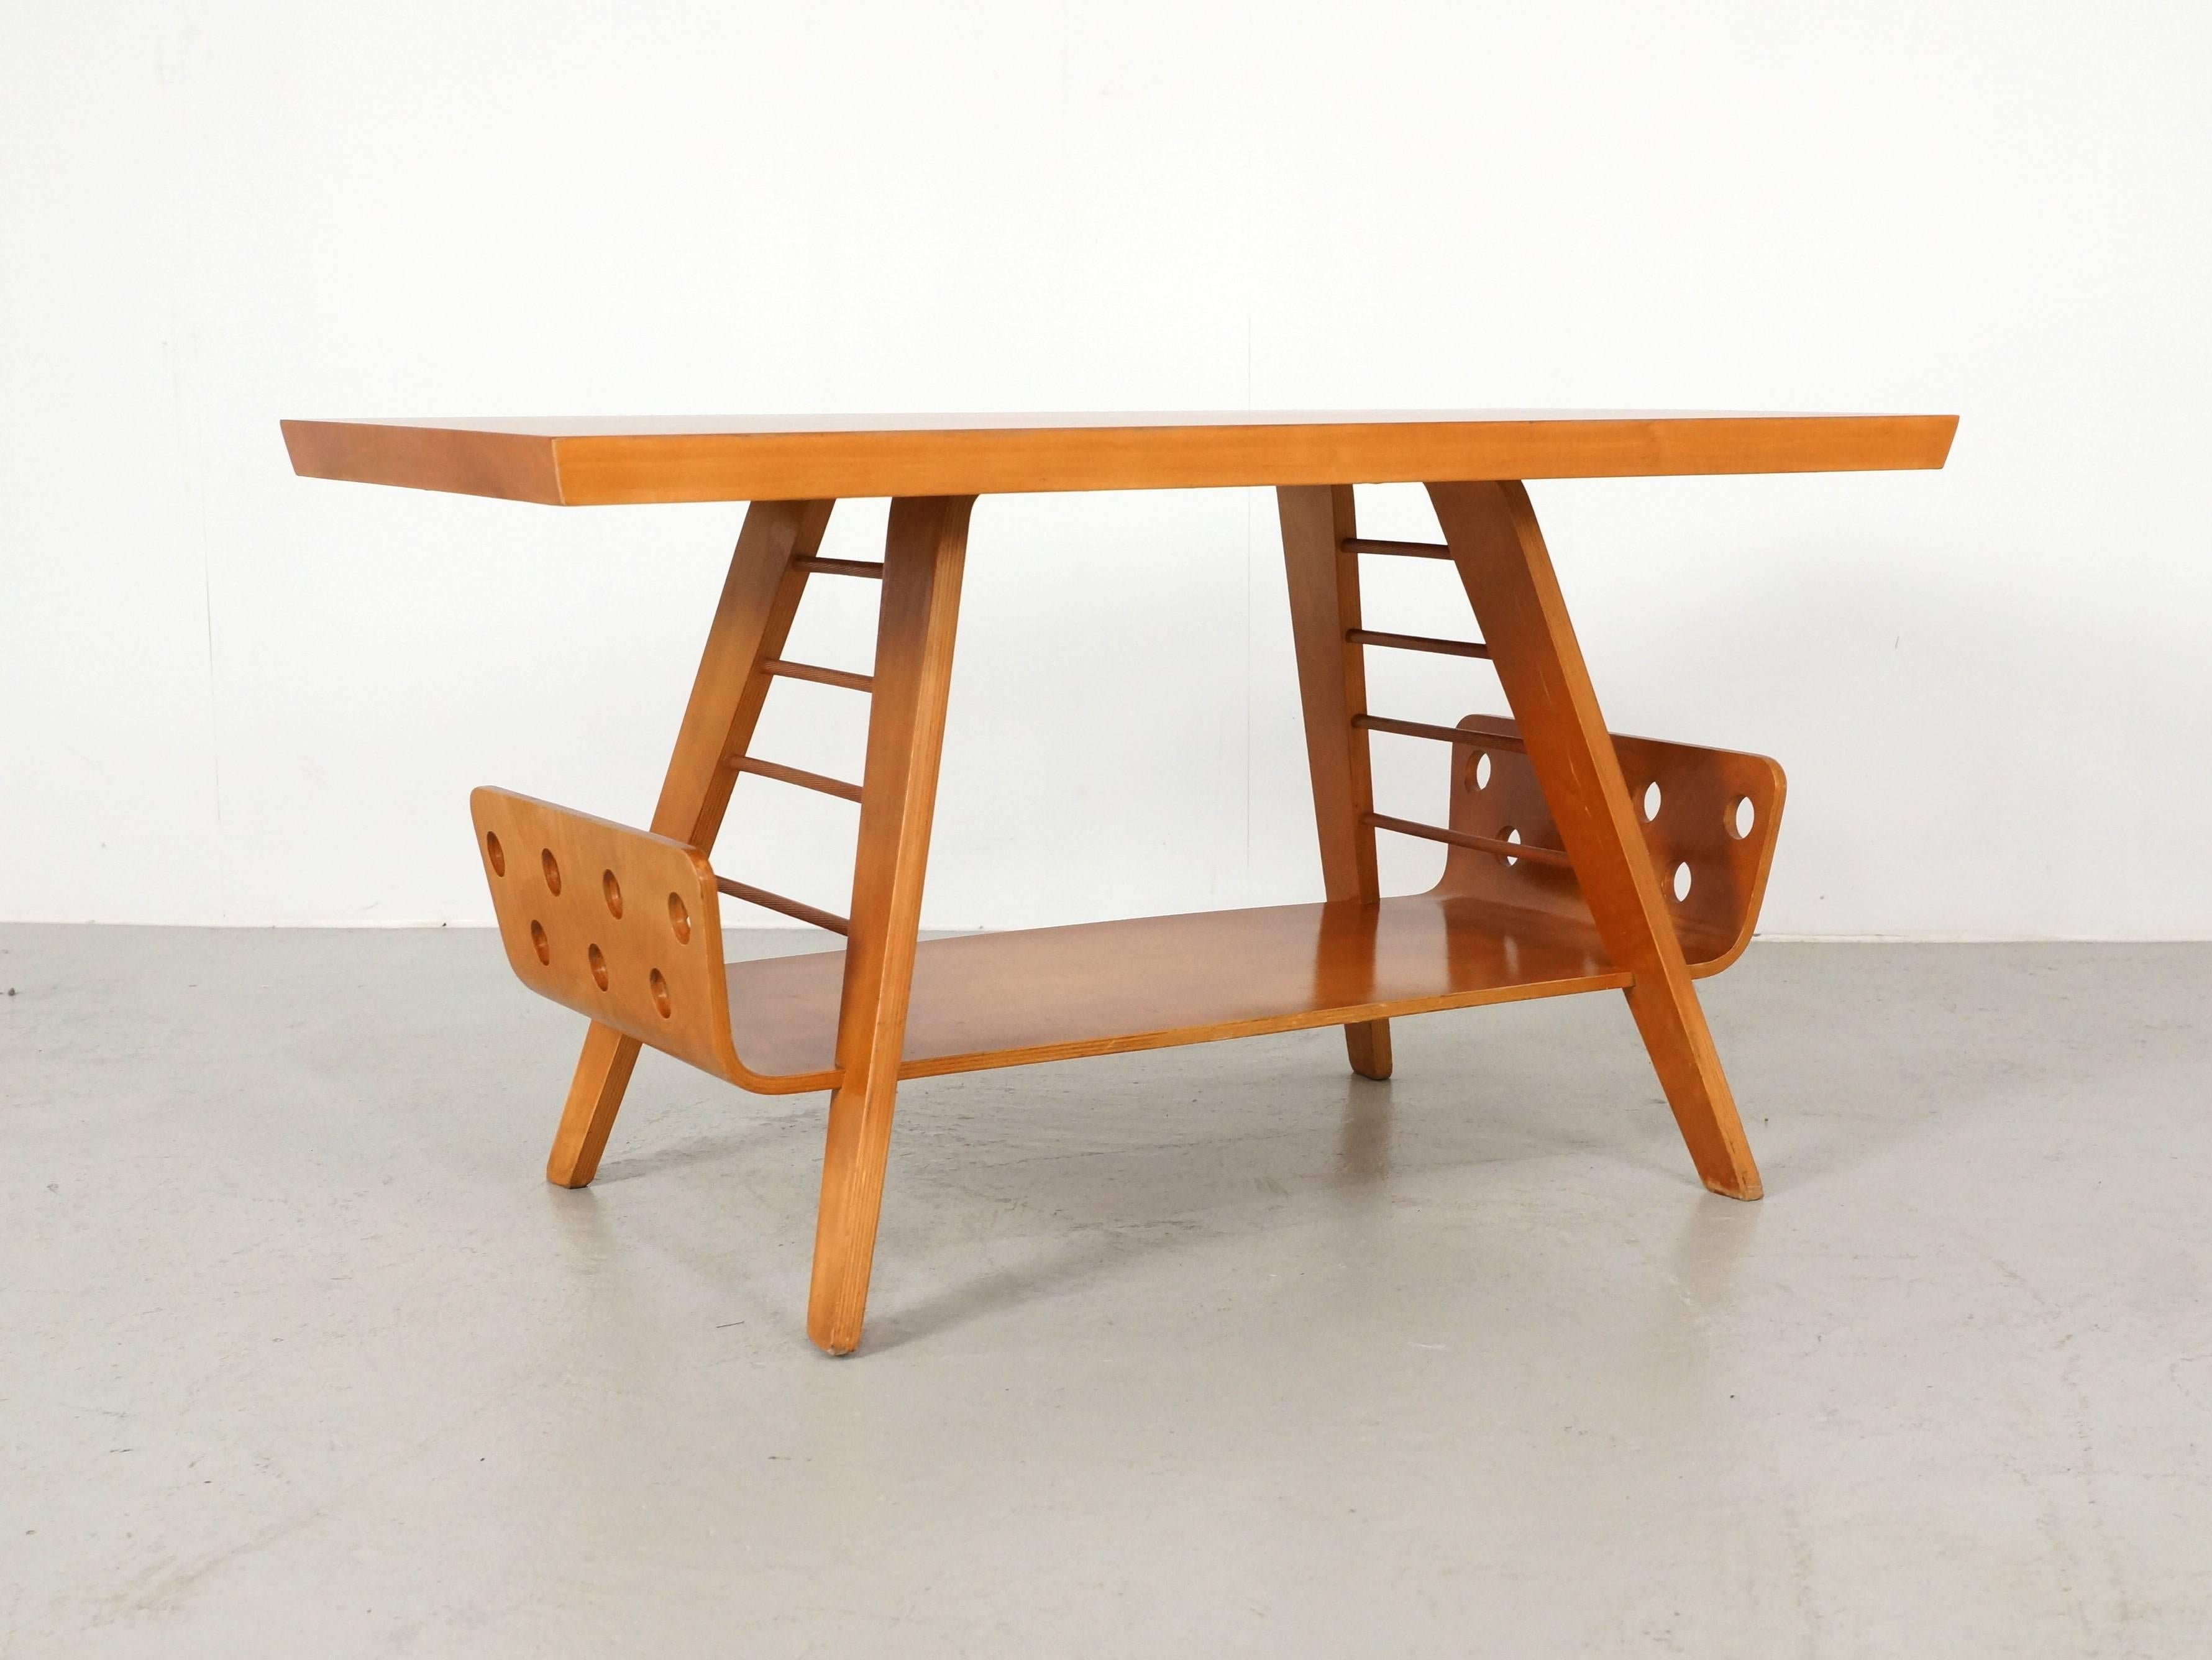 This bent plywood coffee table designed by Cor Alons for Gouda Den Boer is a beautiful Dutch design from the 1950s.
Veneered birch wooden tabletop with underneath a plywood shelve for your Magazines, with bent plywood legs. The bottom shelve has